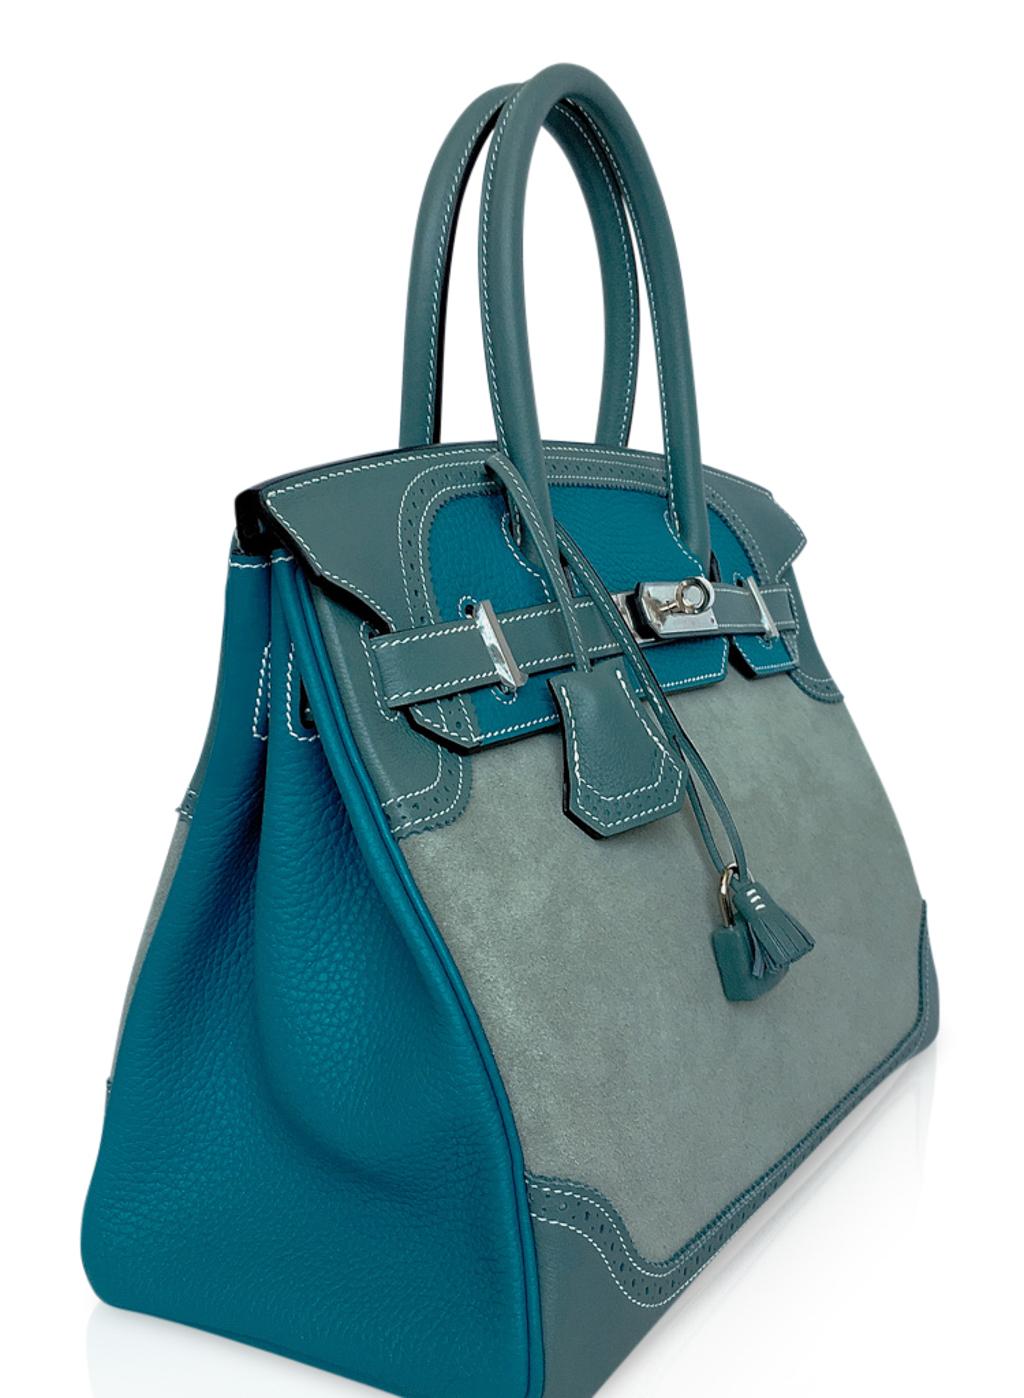 Blue Hermes Birkin 30 Bag Grizzly Doblis Ghillies Ciel Turquoise Limited Edition New